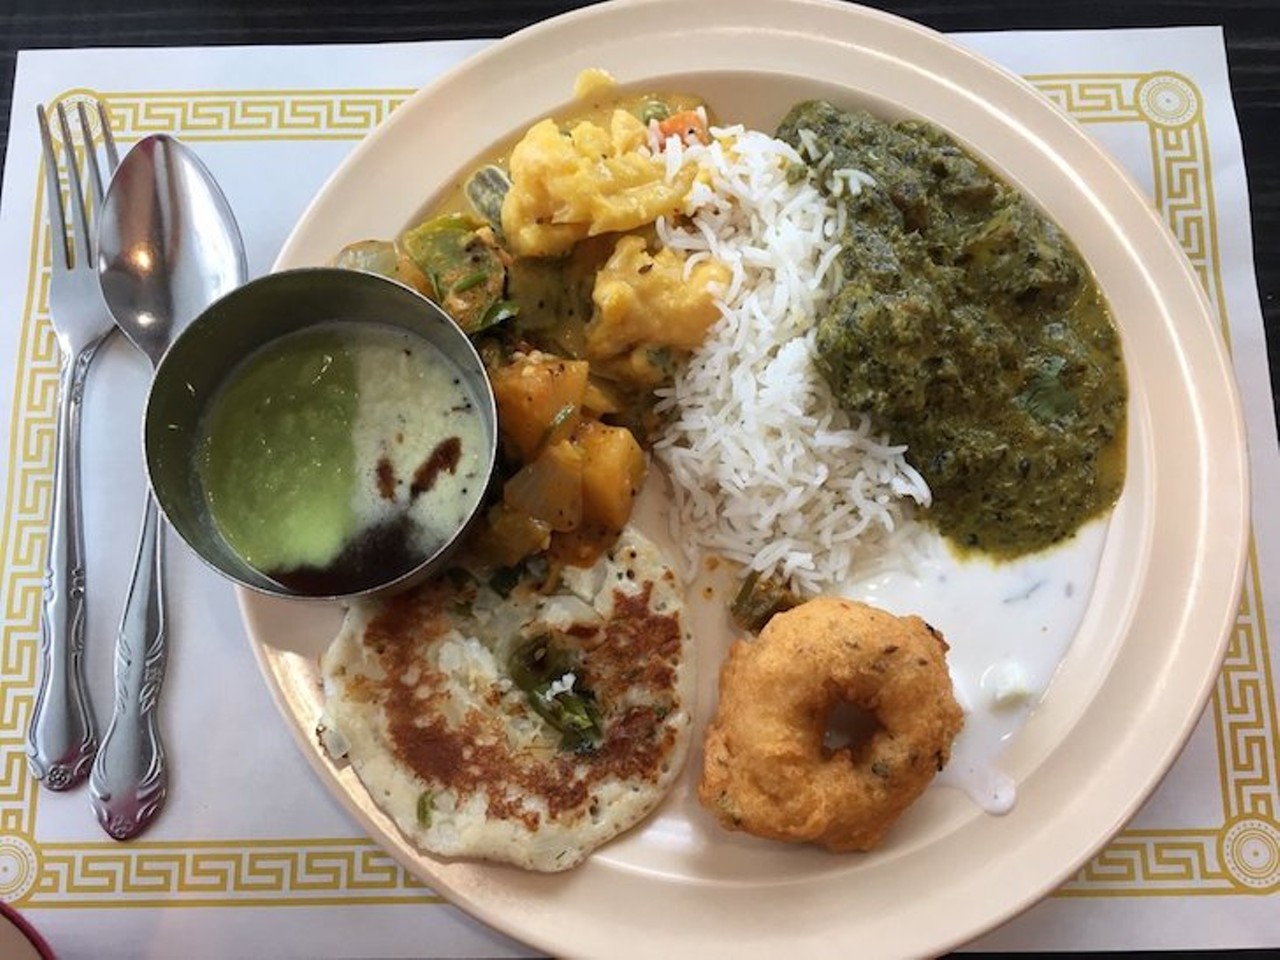 Woodlands Indian Cuisine  
6040 S. Orange Blossom Trail, 407-854-3330
Considered one of the best vegetarian buffets in town, Woodlands offers traditional Indian cuisine and a mini dosa with every meal. 
Photo via A.C./Yelp